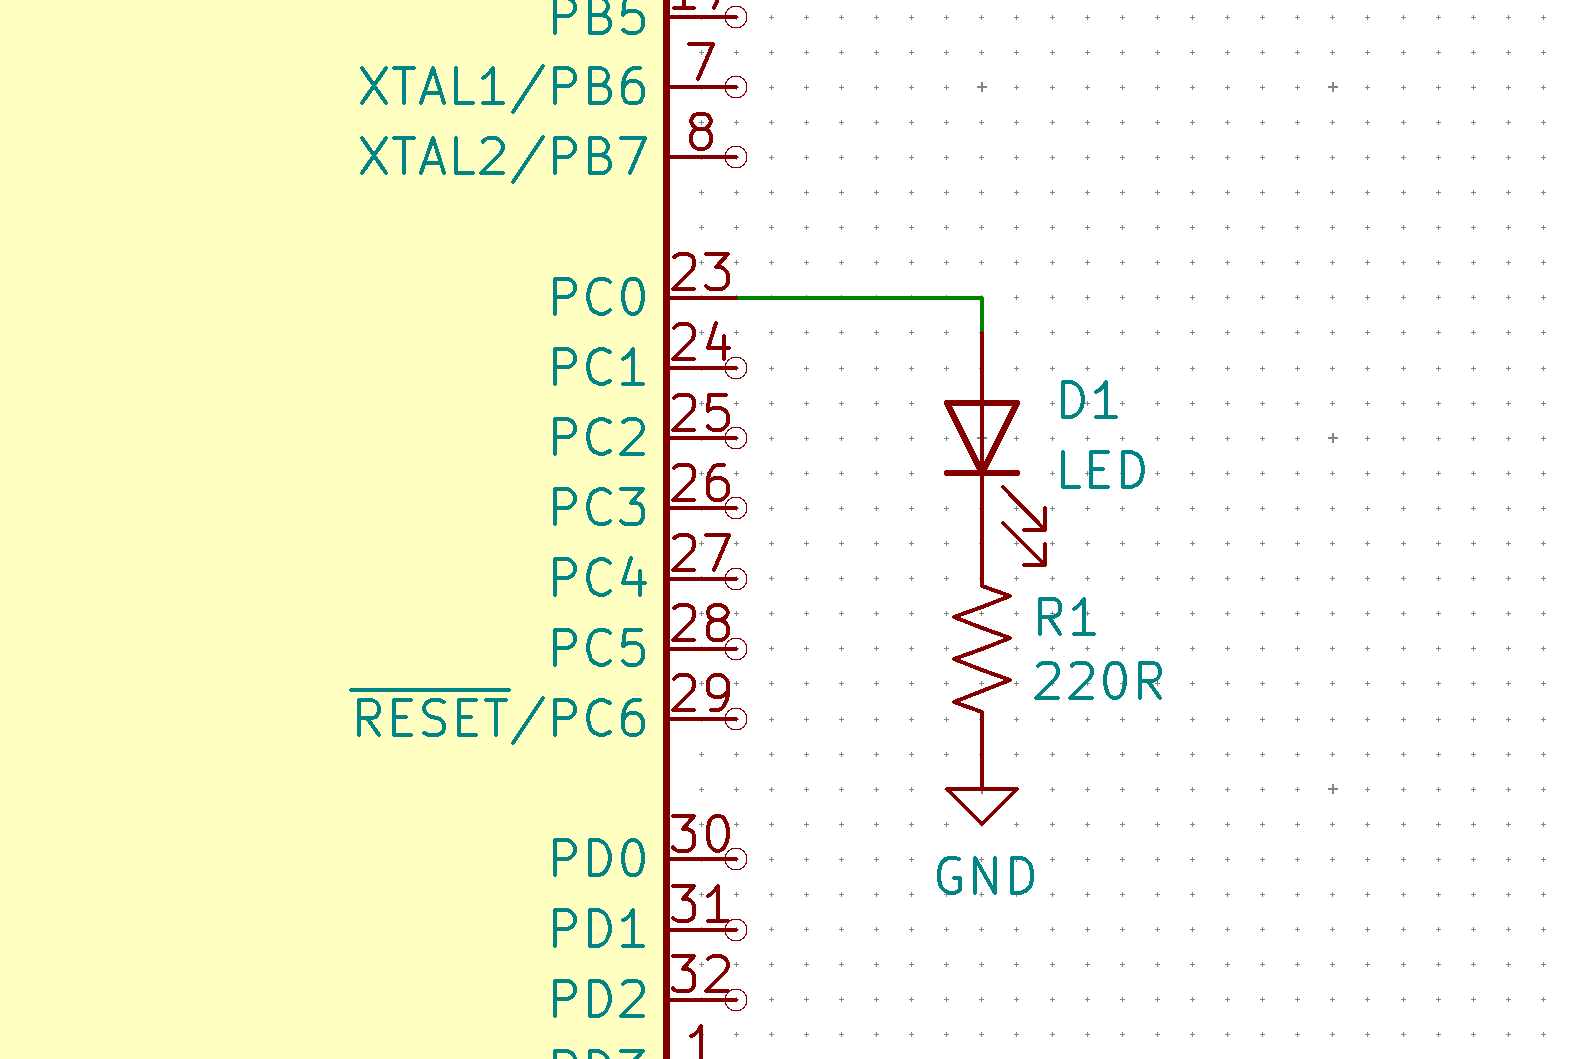 An Atmega328P microcontroller uses a i/o line to go to the anode of an LED, then a 220R resistor, then to ground. A very simple LED driver circuit.